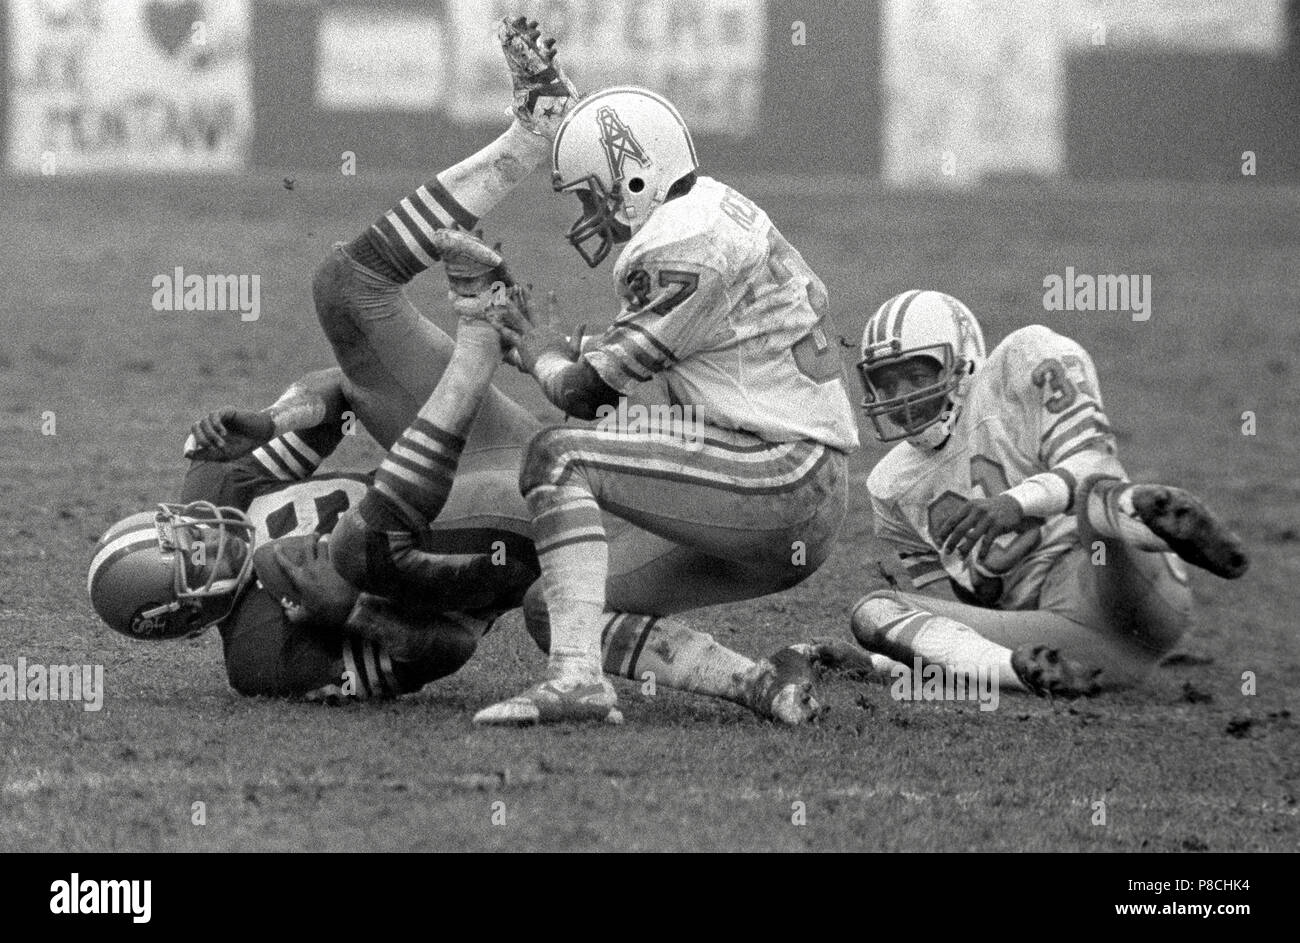 San Francisco, California, USA. 13th Dec, 1981. San Francisco 49ers vs.  Houston Oilers at Candlestick Park Sunday, December 13. 1981. 49ers beat  Oilers 28-6. Huston Oilers Defensive backs Mike Reinfeld (34) and